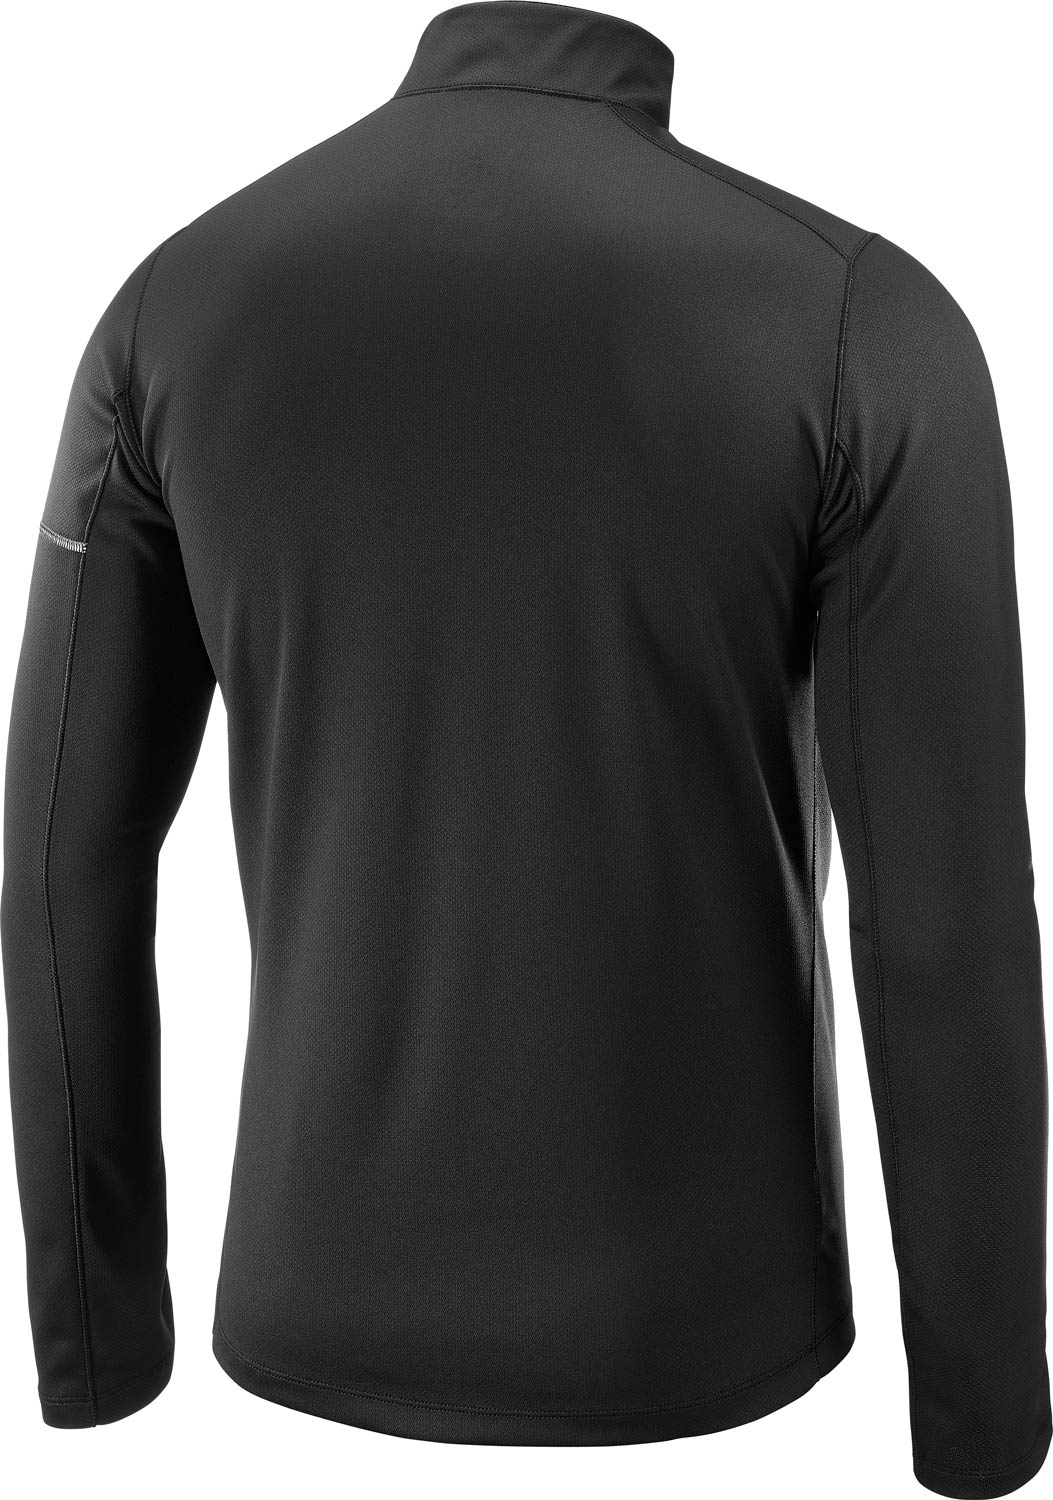 Men's middle layer